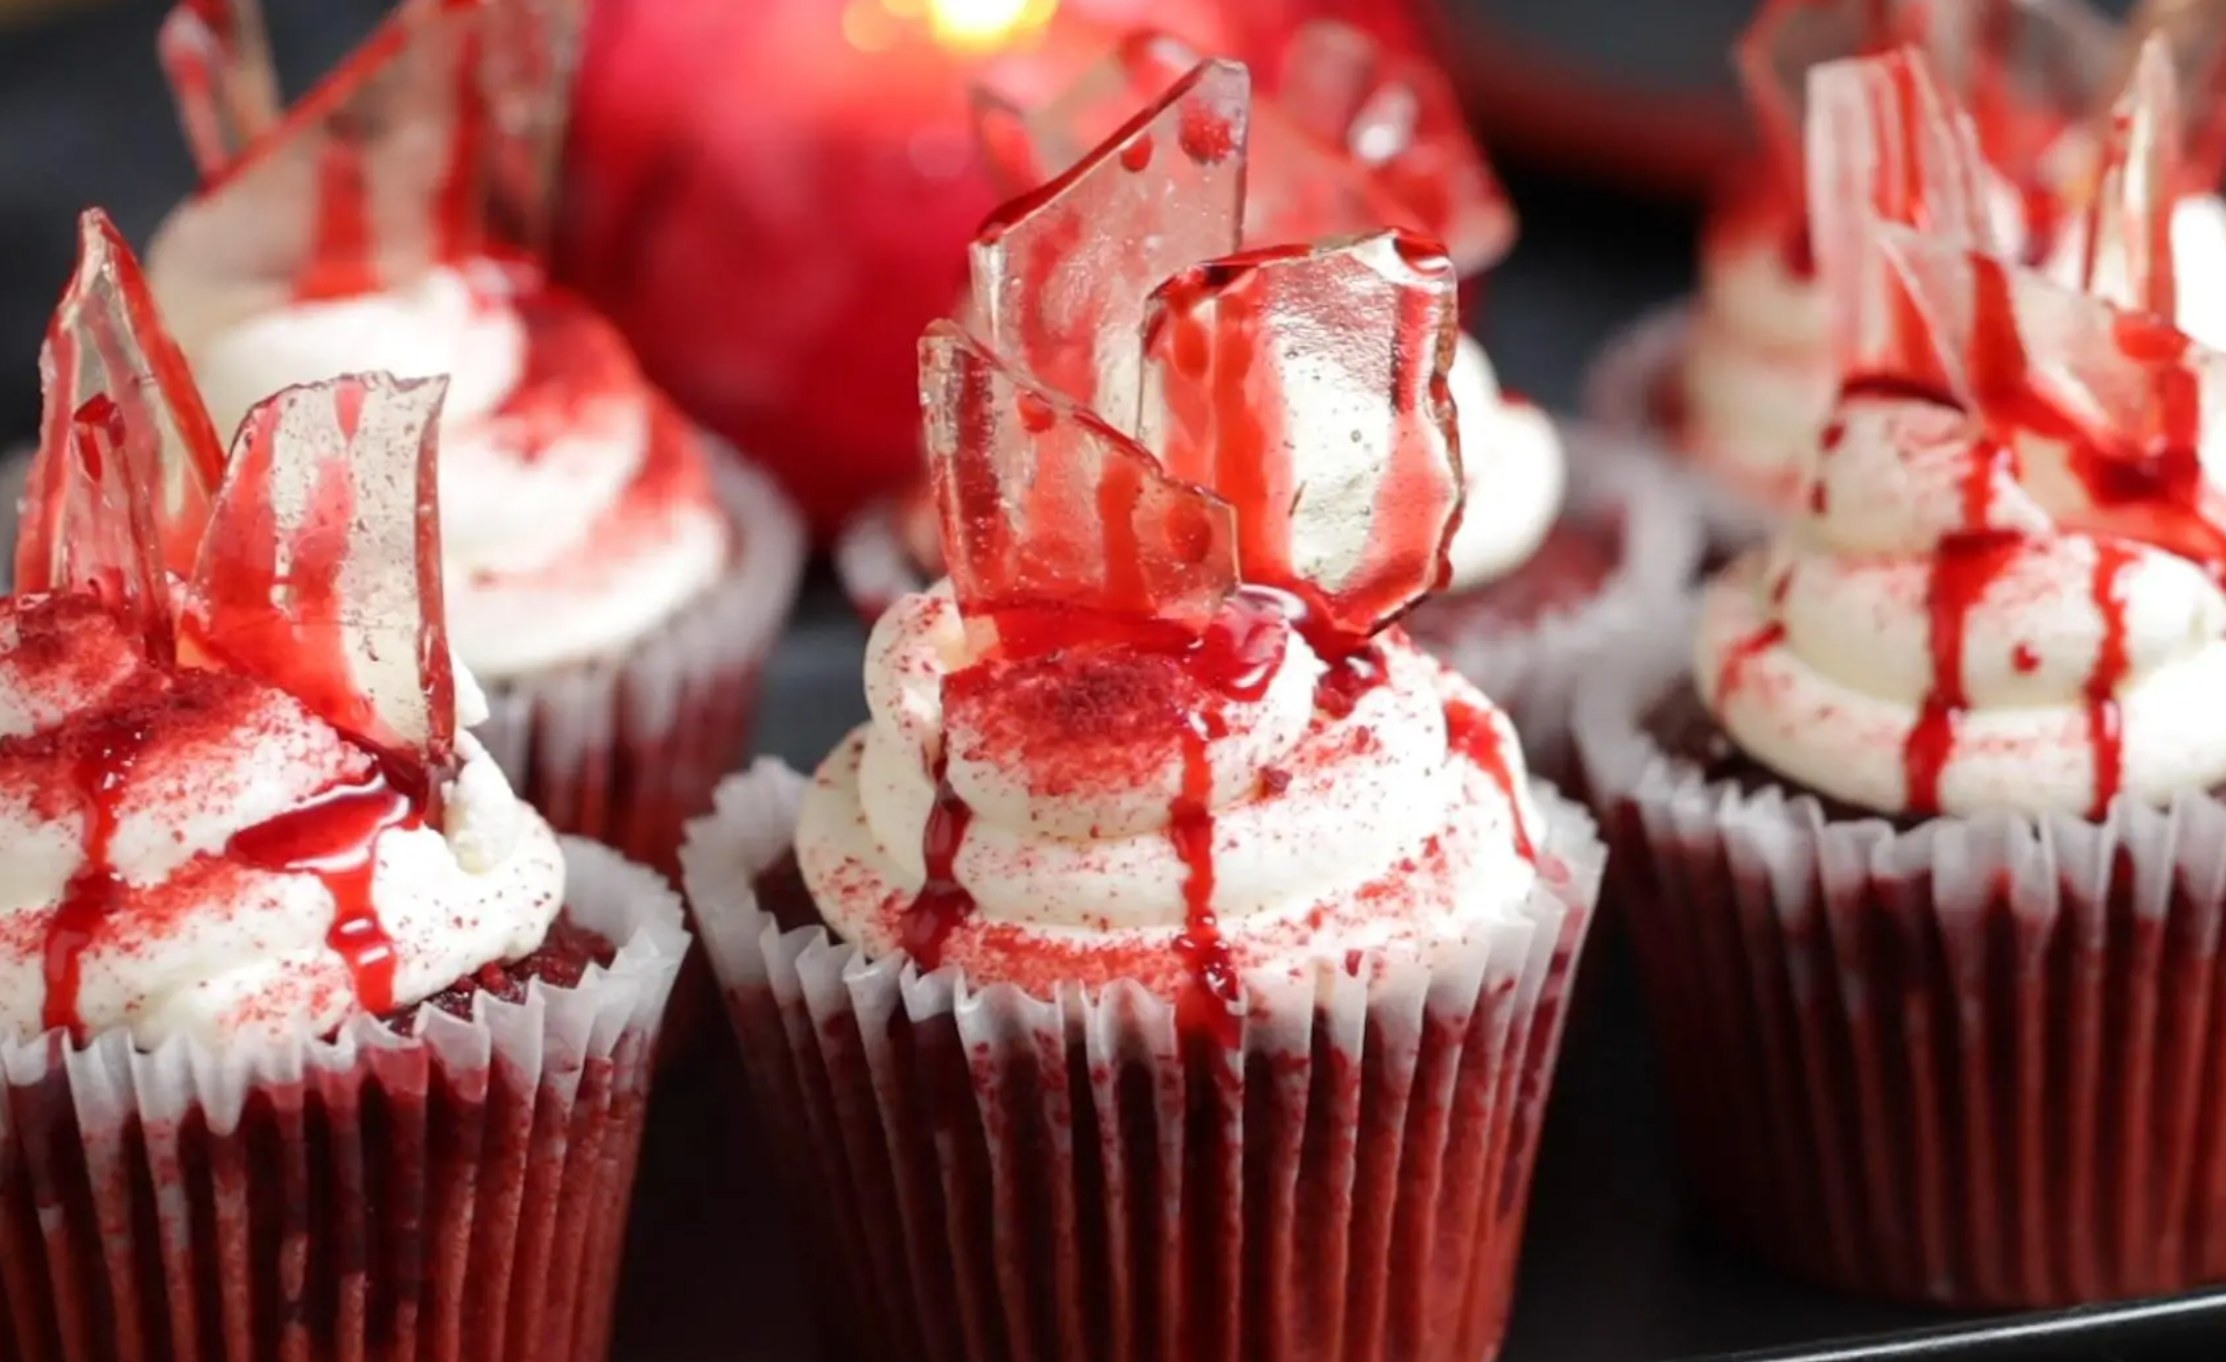 red velvet cupcakes decorated to look like they have blood and glass on top